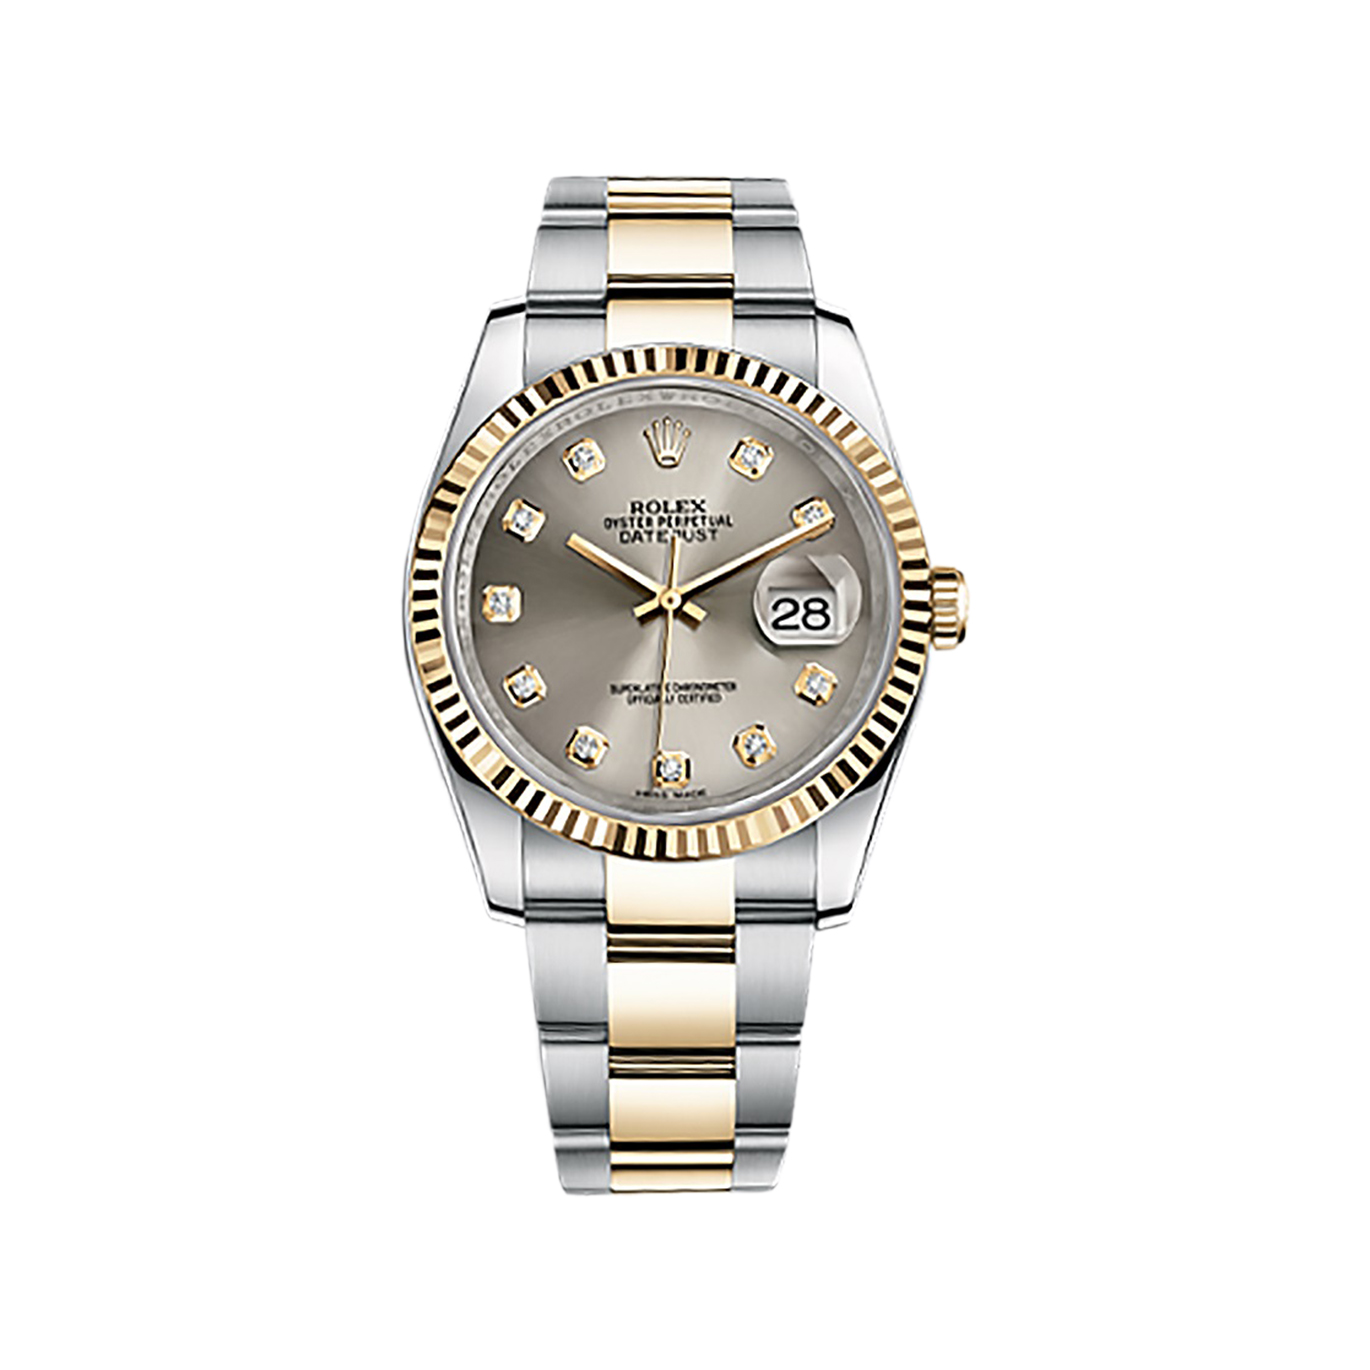 Datejust 36 116233 Gold & Stainless Steel Watch (Steel Set with Diamonds) - Click Image to Close